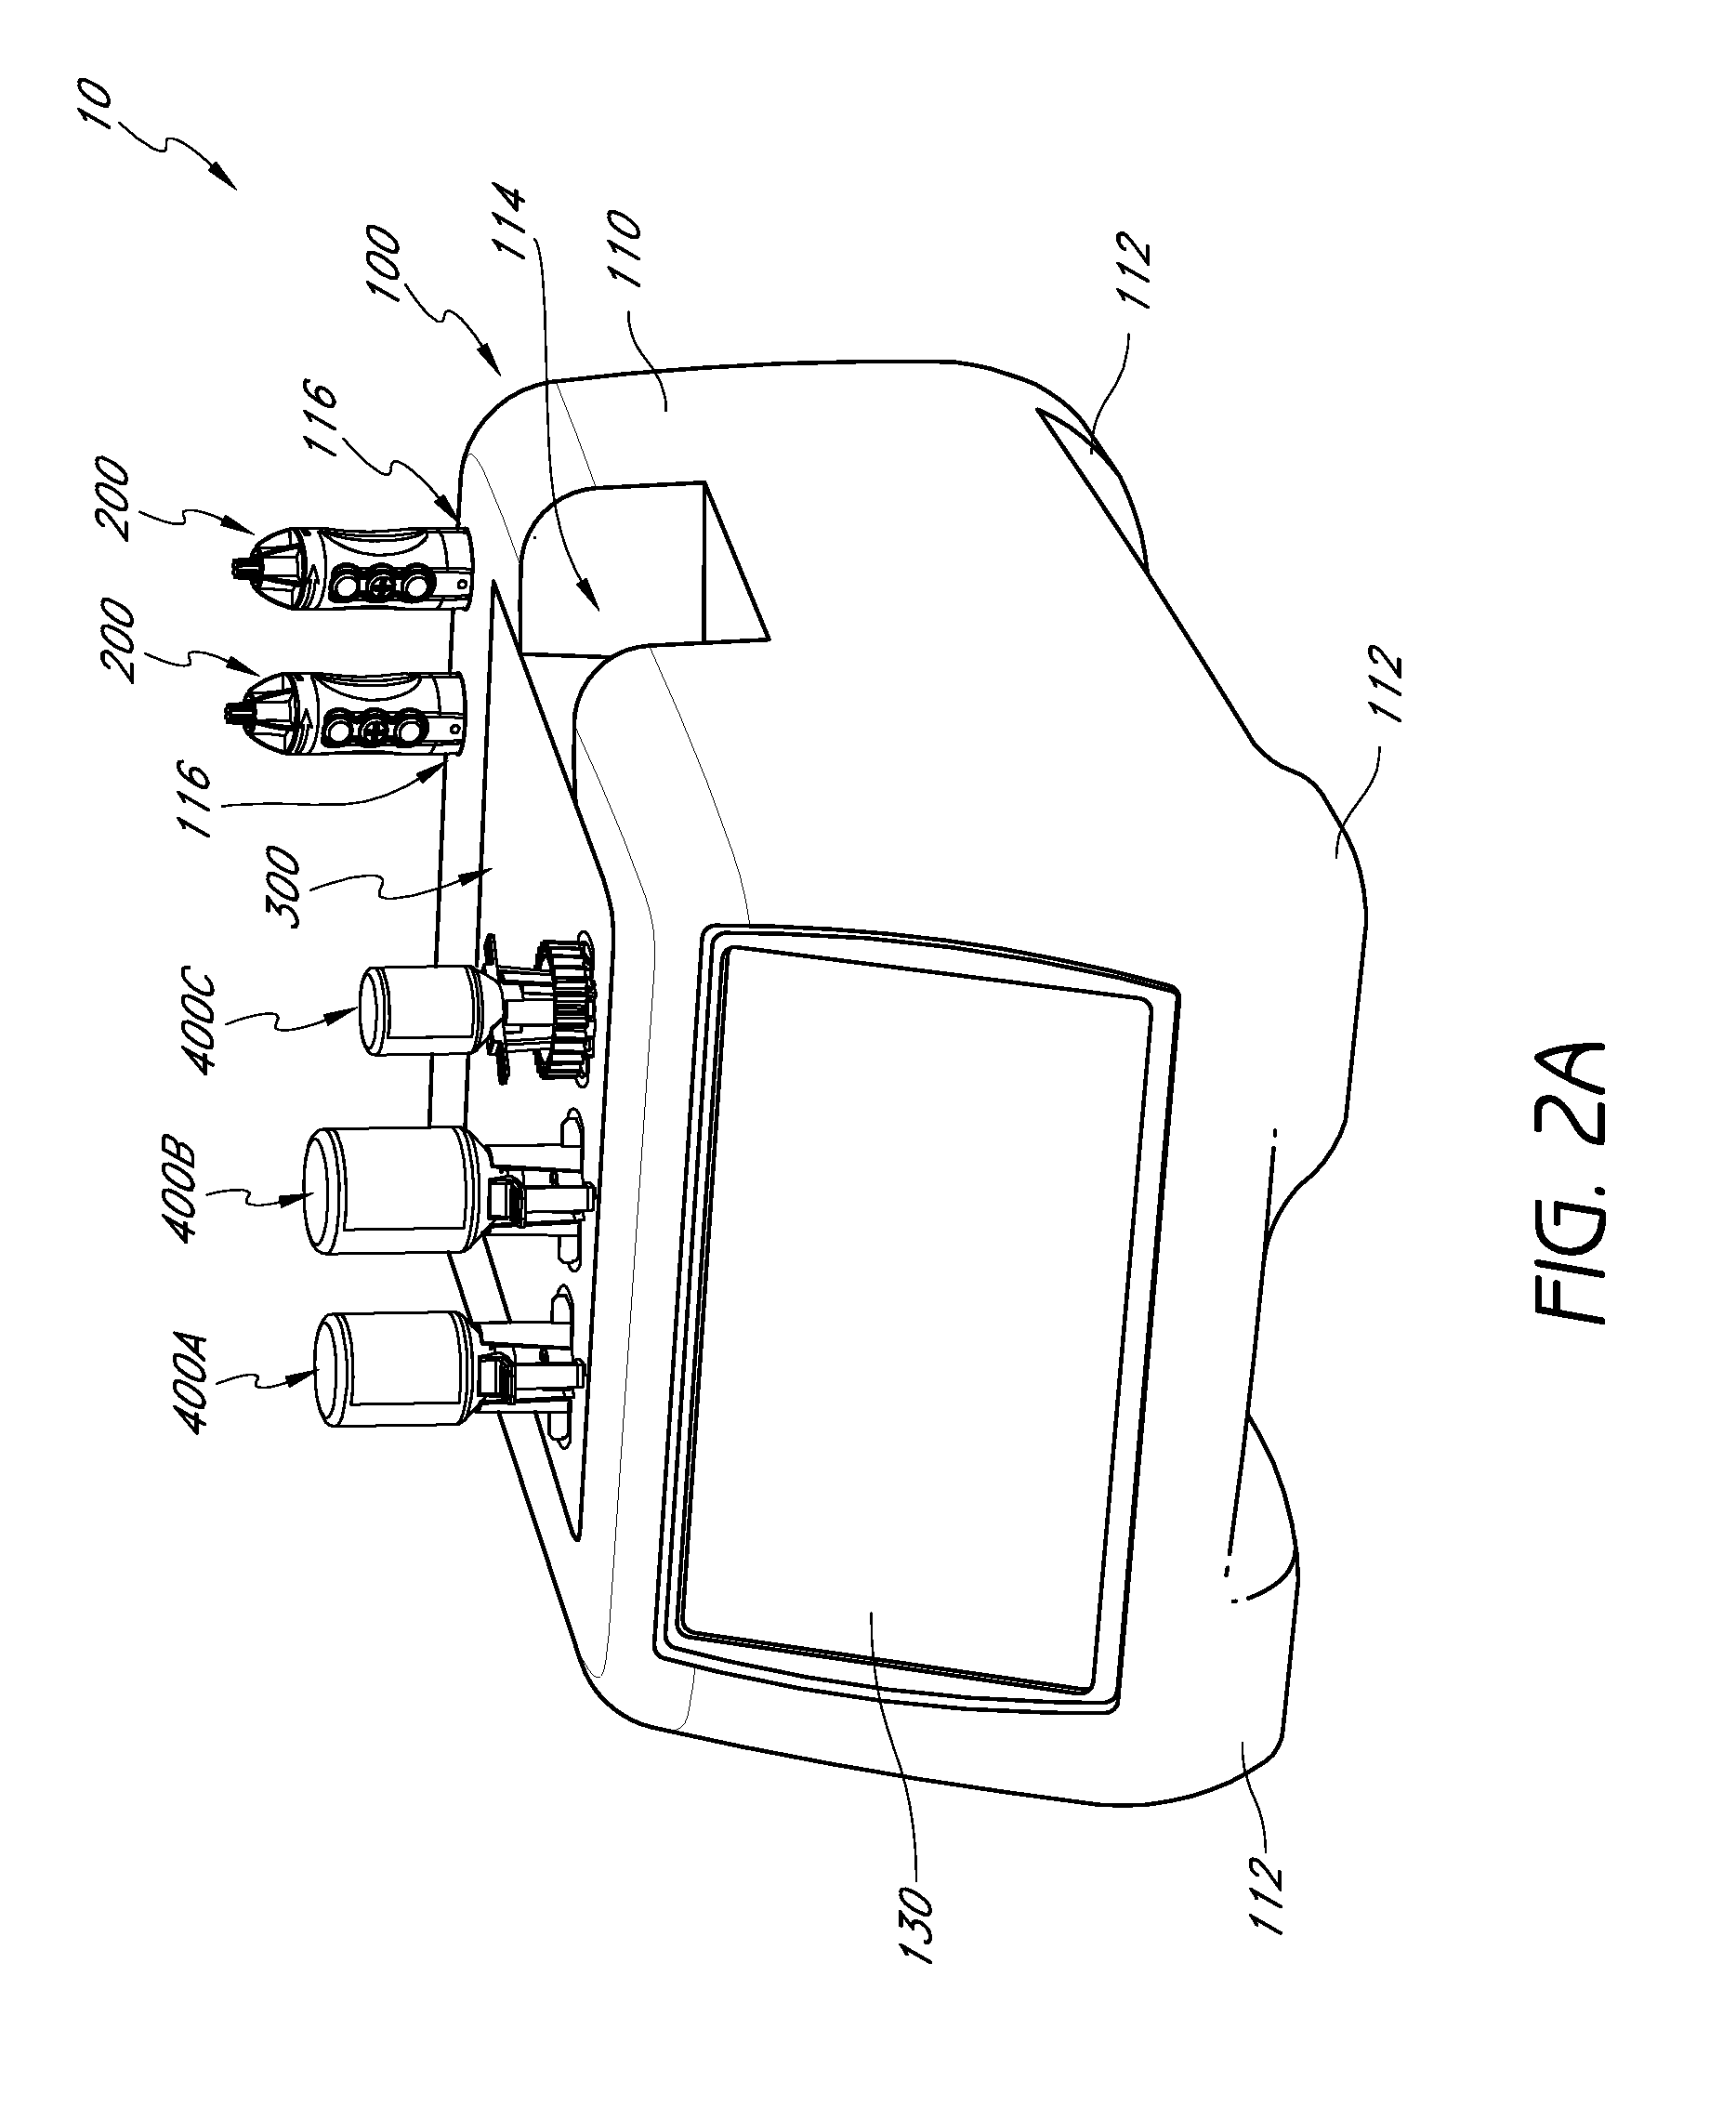 Method of treating a joint using an articular injection system